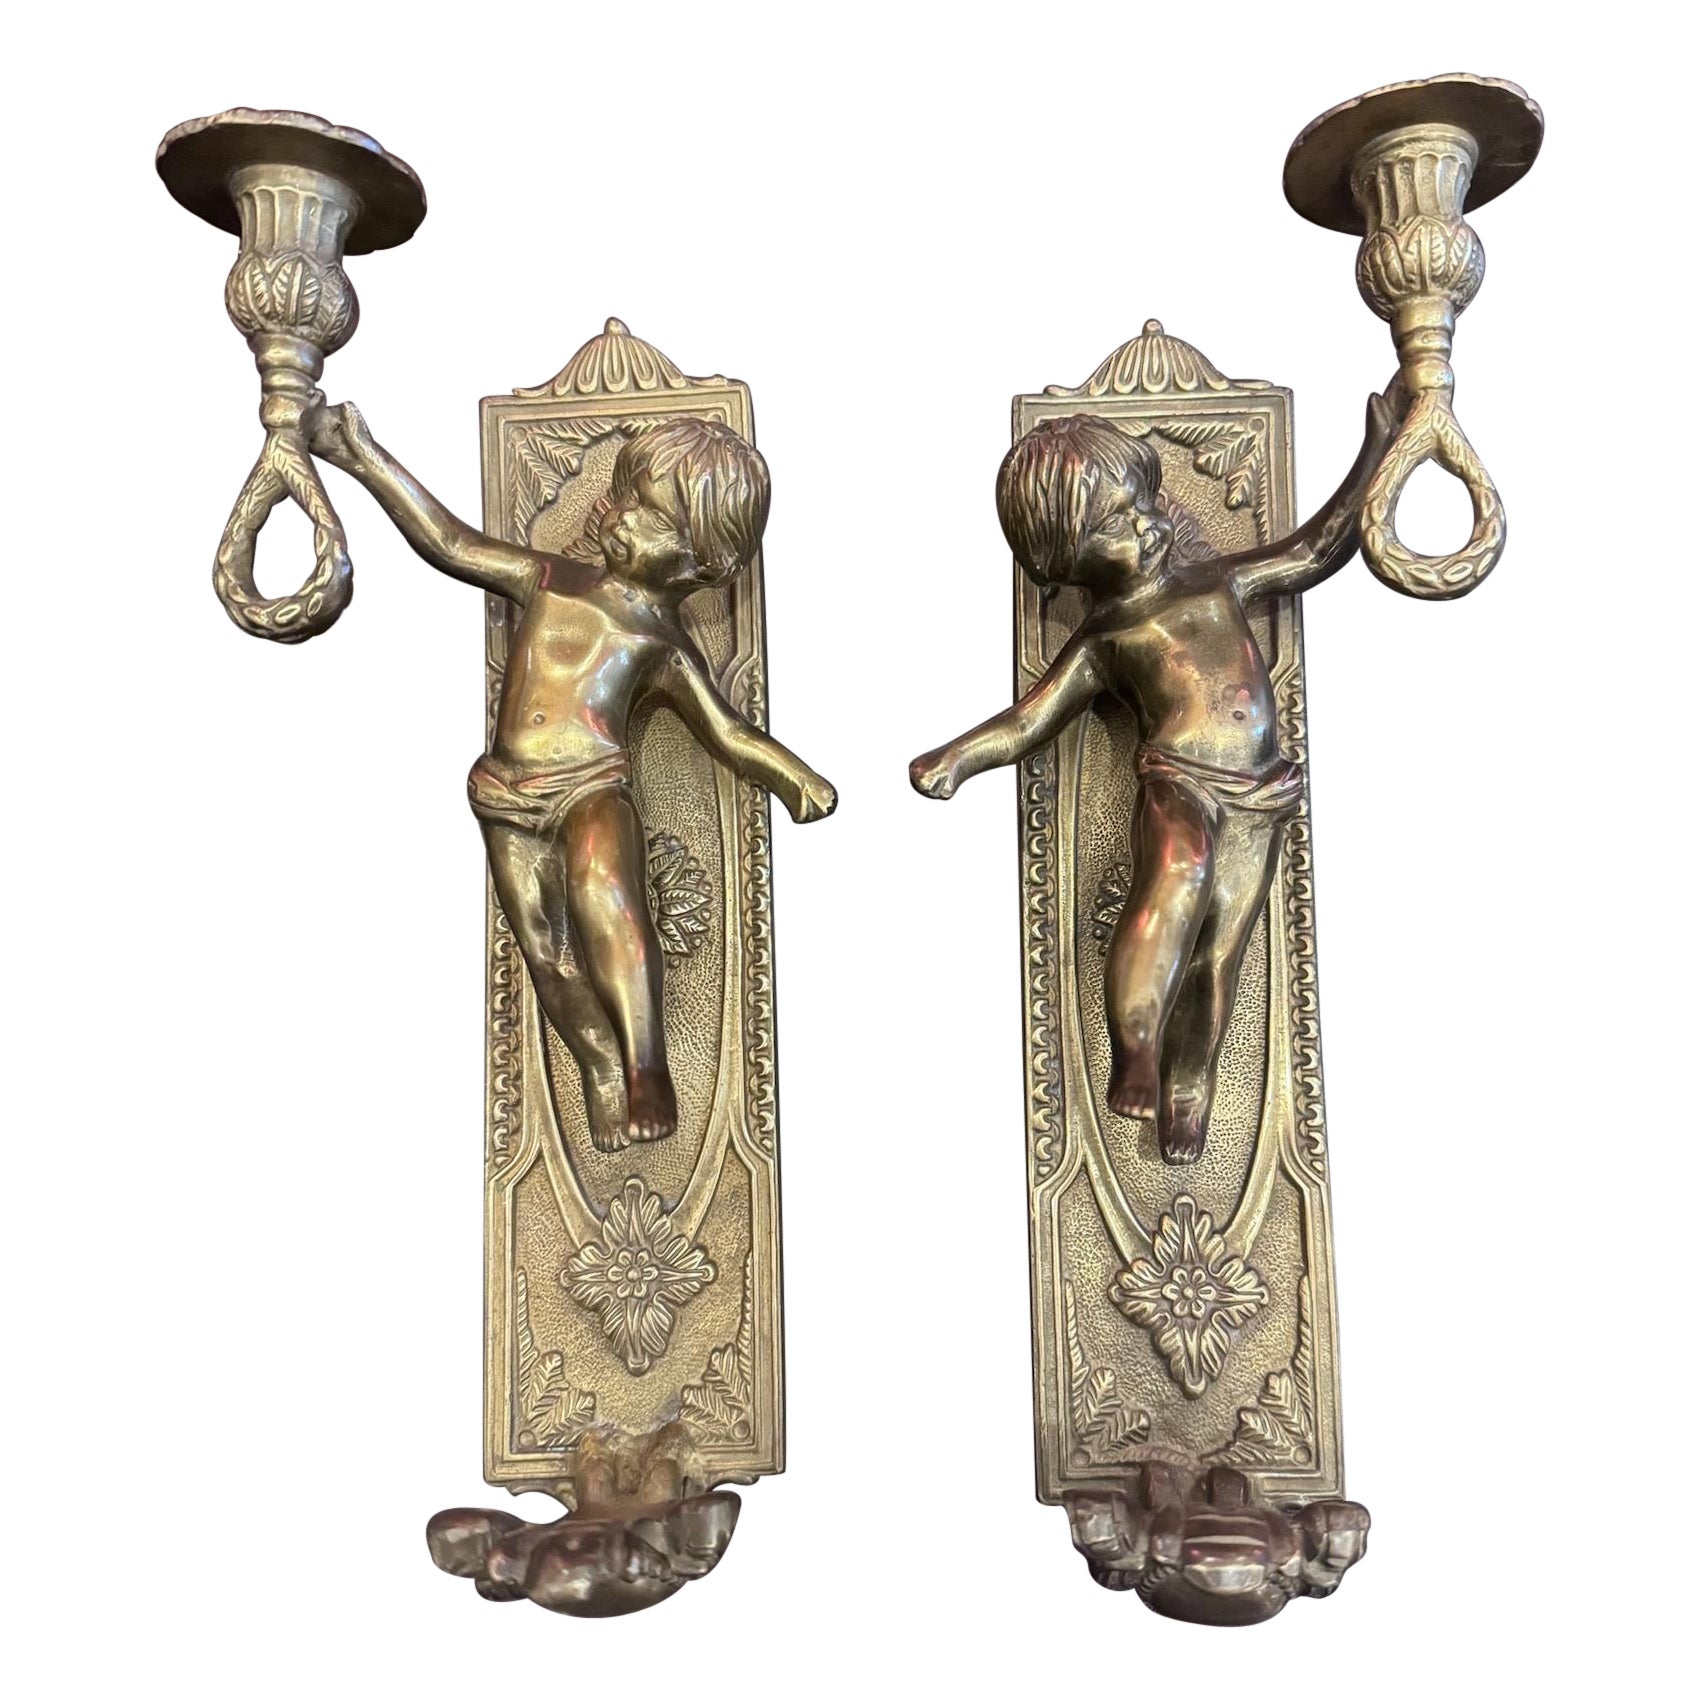 Vintage Brass Putti Cherub Angel Wall Mounted Sconces Candle Holders - Set of 2 For Sale